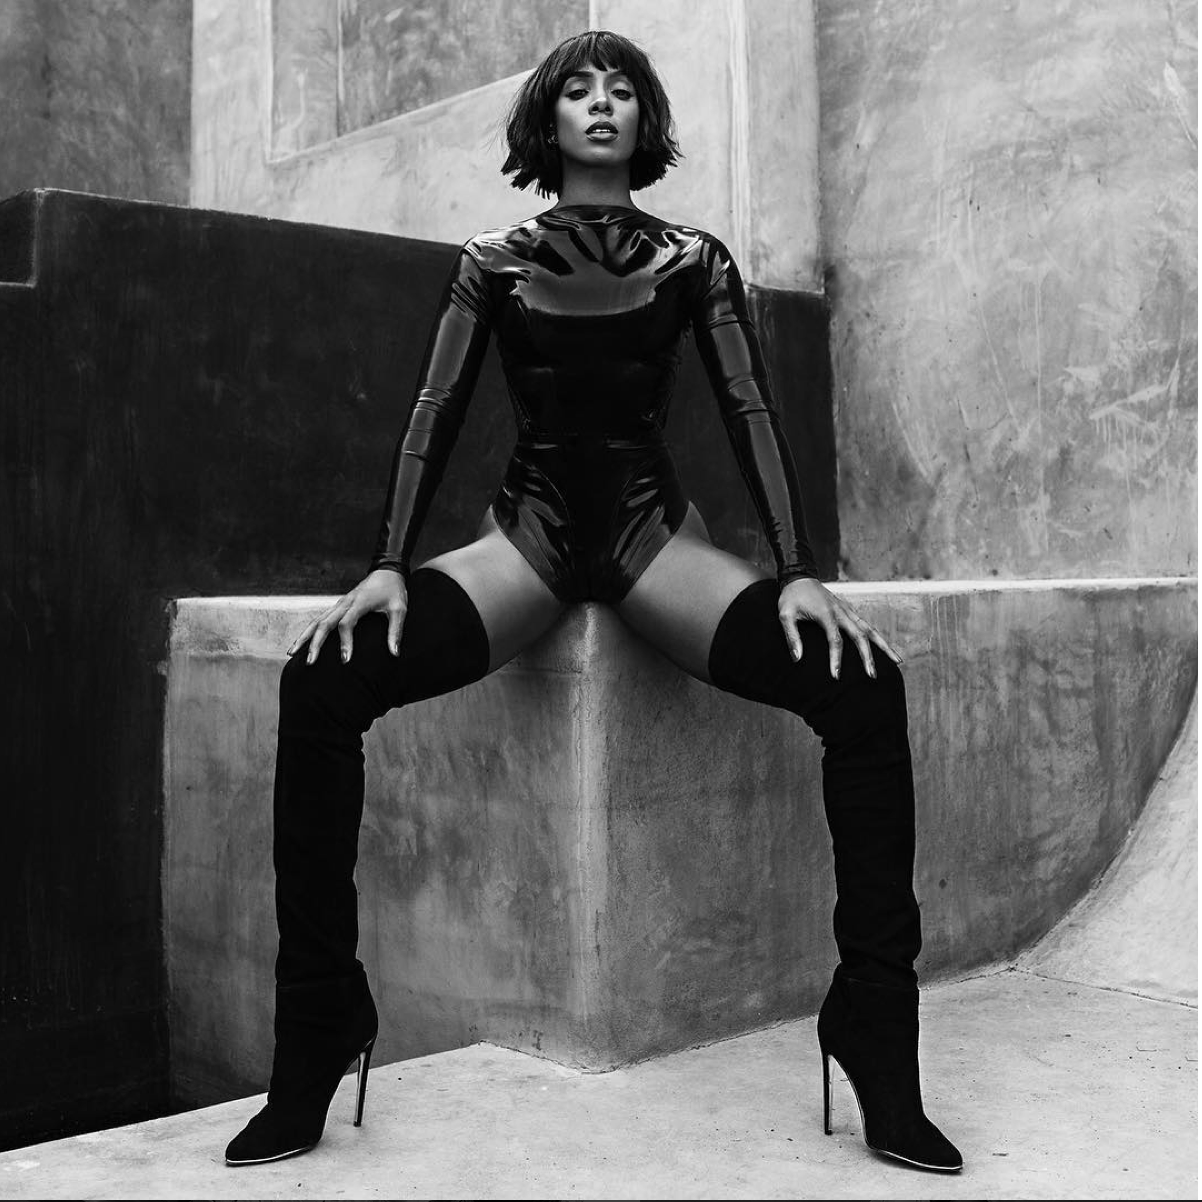 12 Breathtaking Photos That Prove Kelly Rowland Has Serious Supermodel Potential
